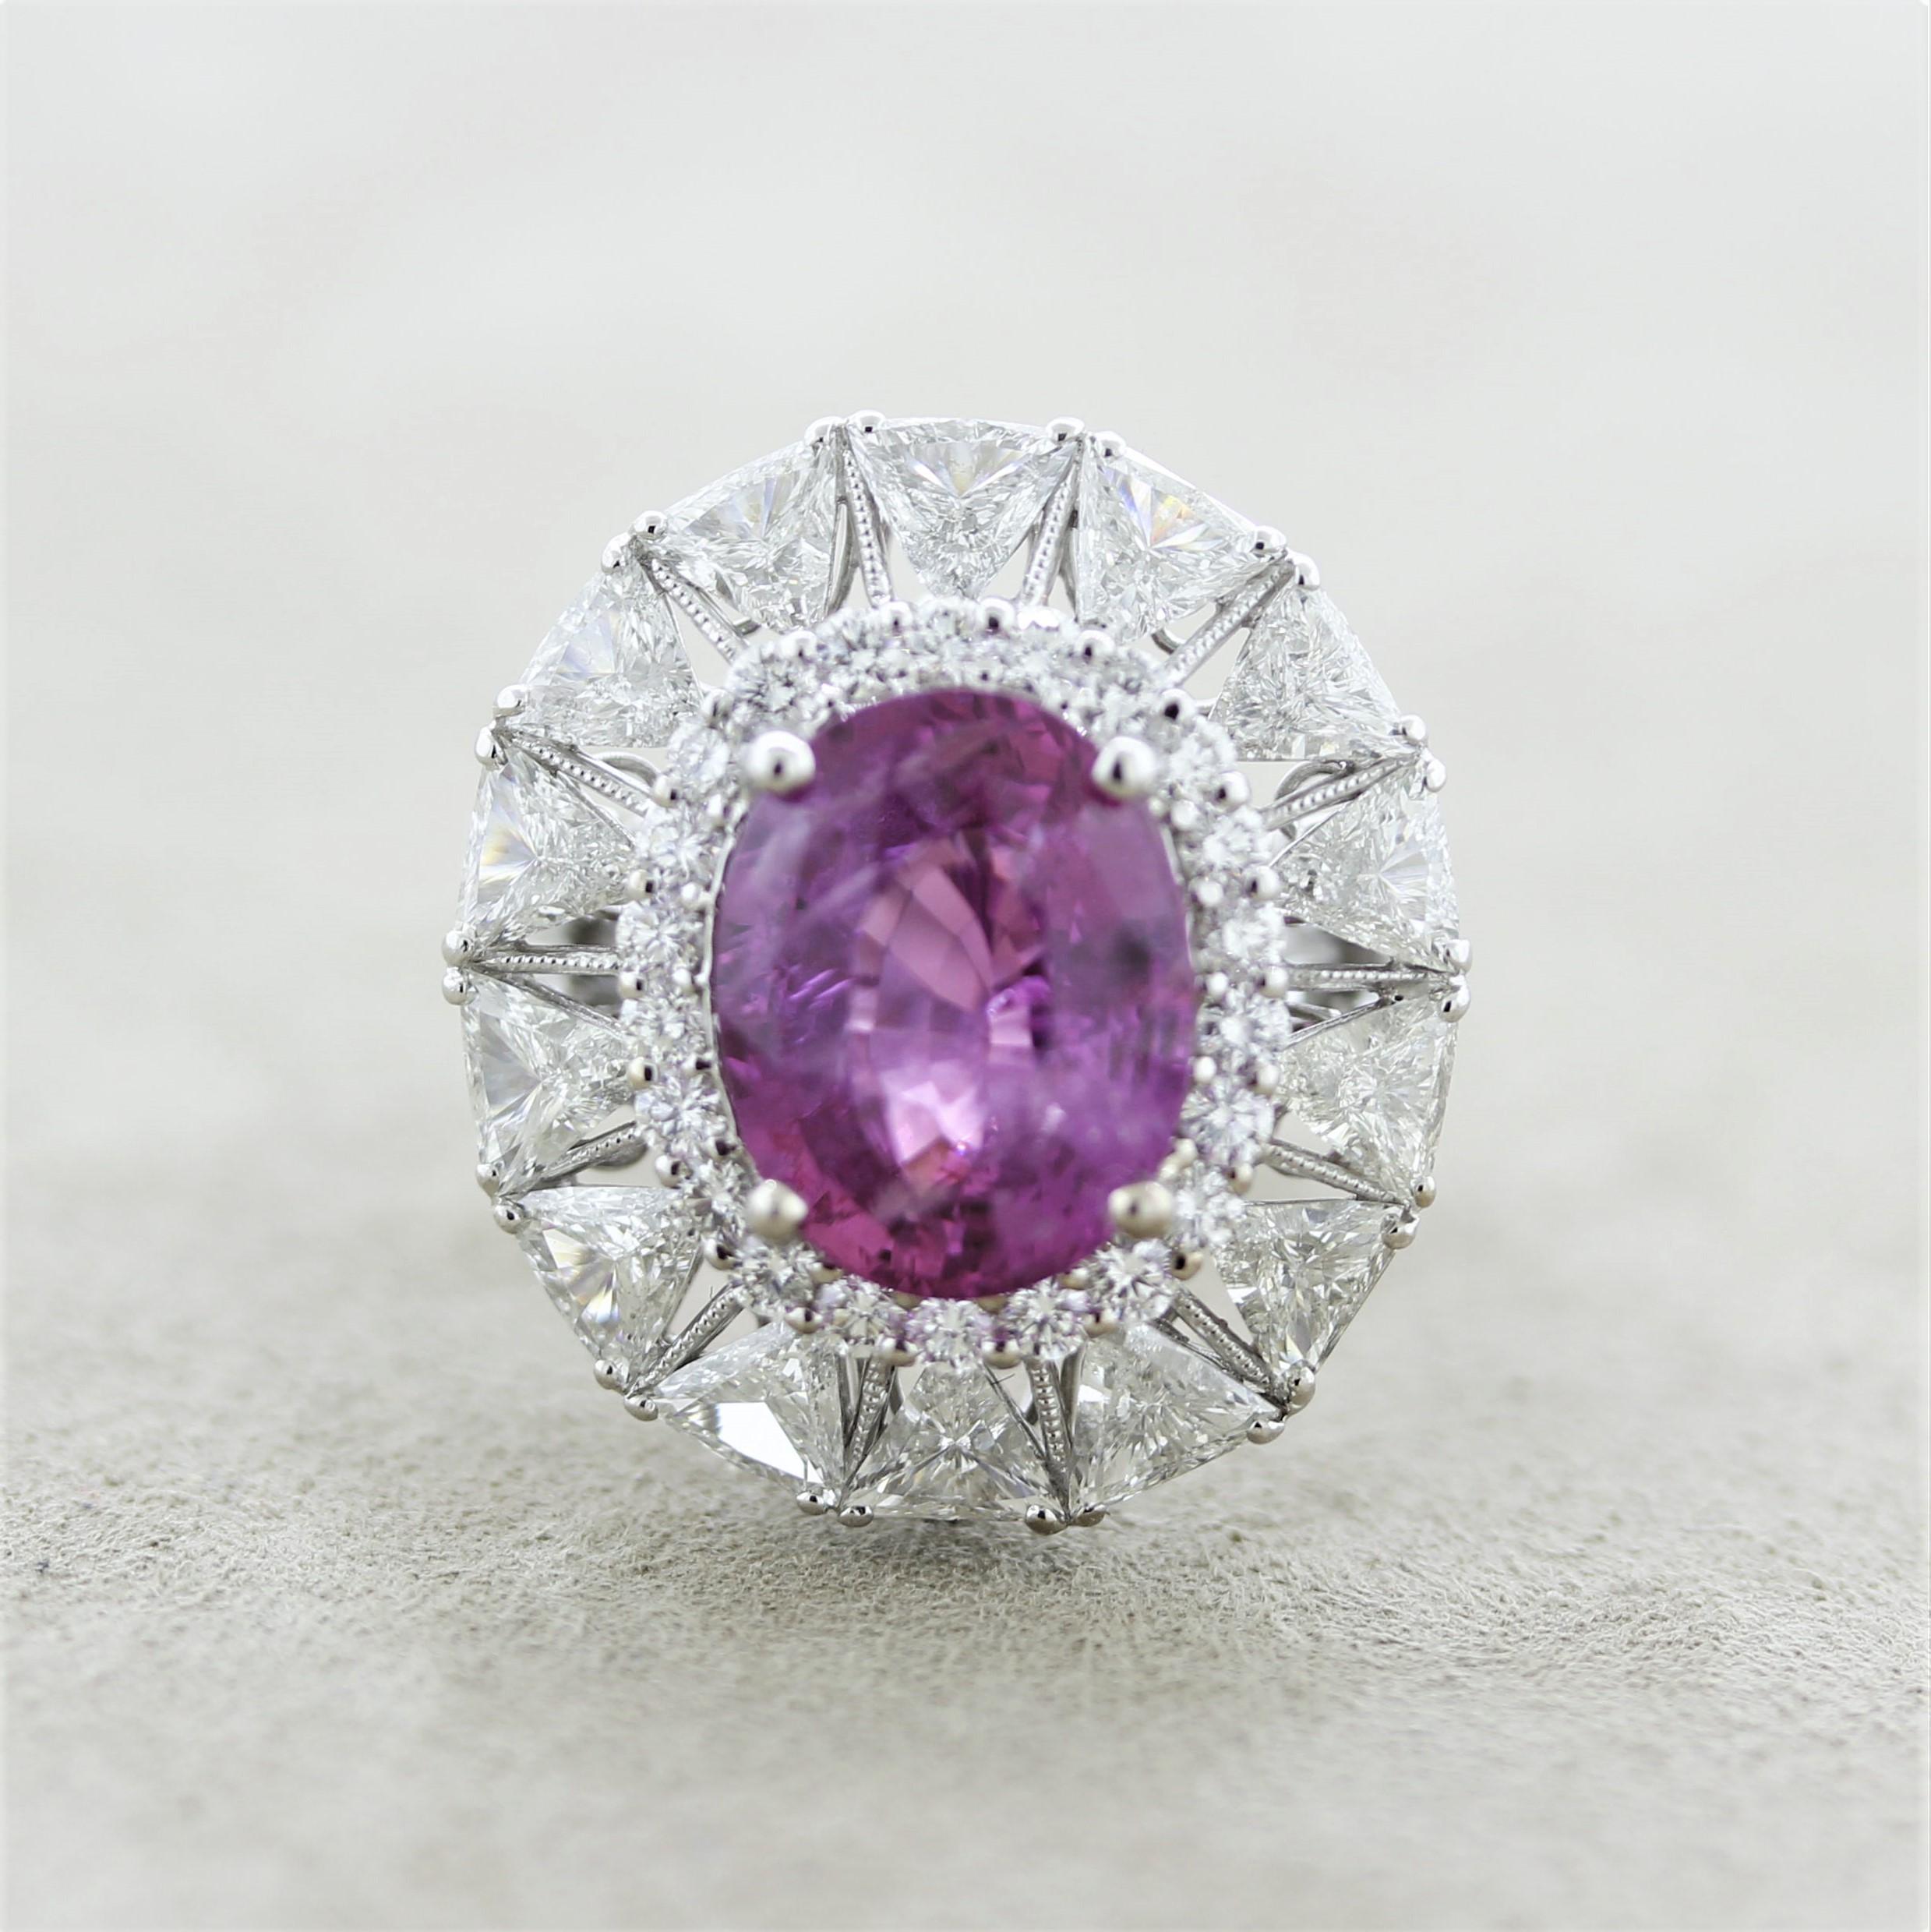 A large and rare fancy pink sapphire which has no indications of treatment of any kind, certified by the GIA. It weighs an impressive 7.08 carats and has a bright intense pink color and a lovely oval shape. It is complemented by 3 carats of